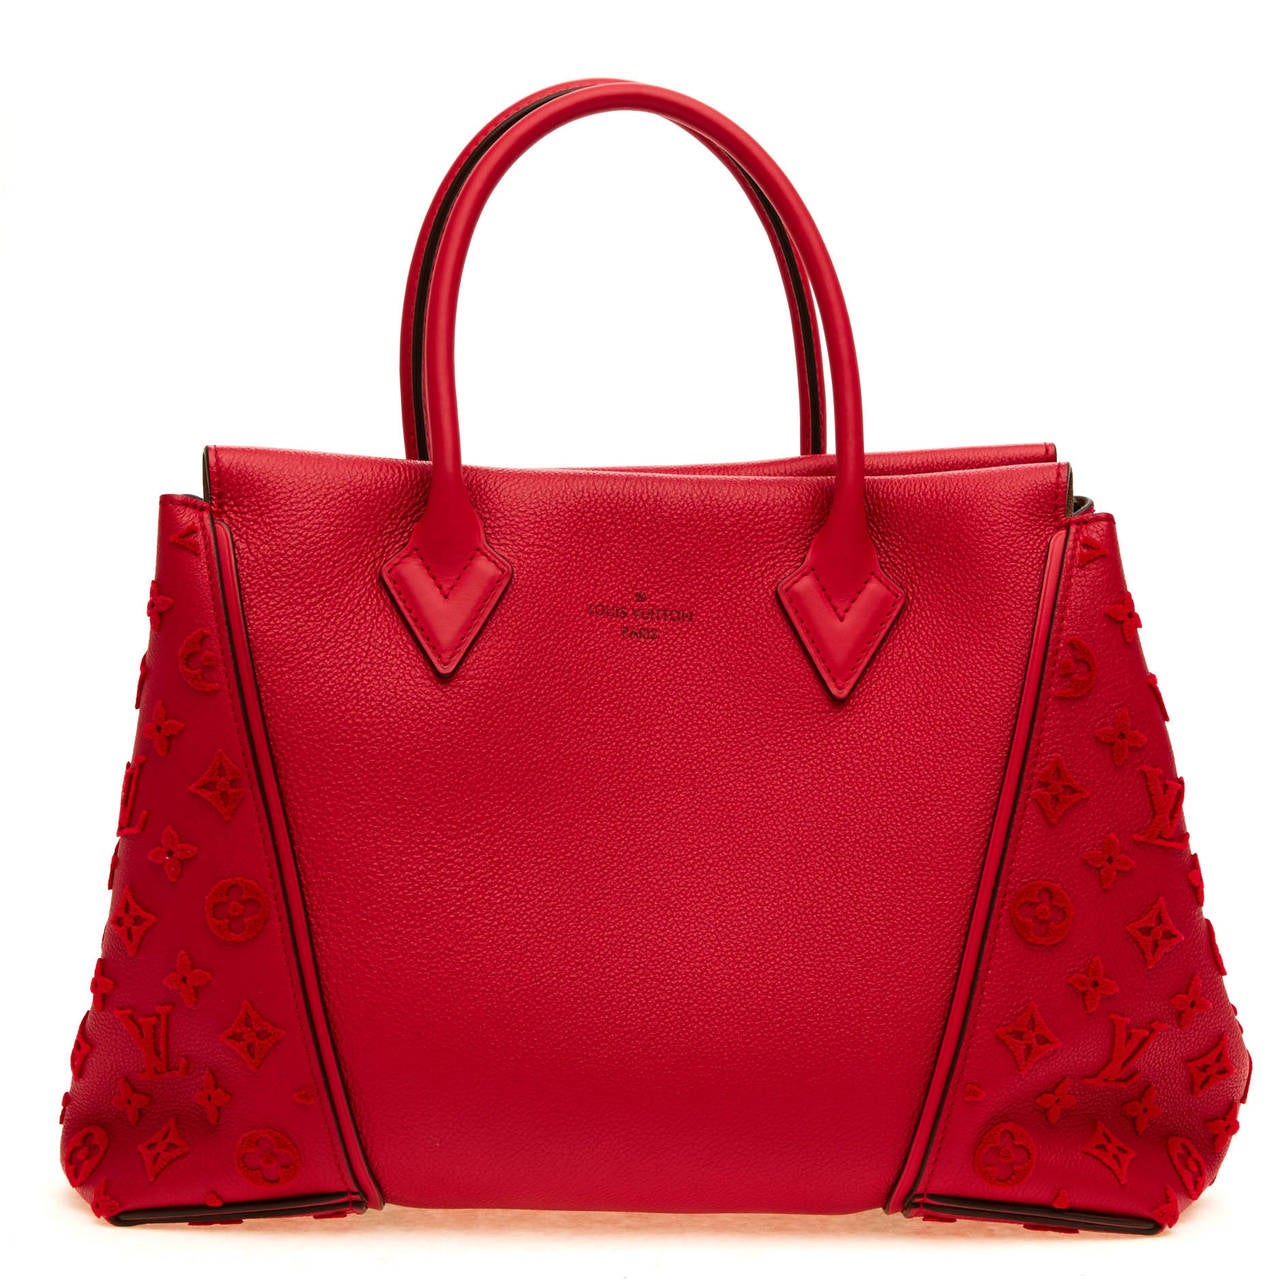 This Louis Vuitton Veau Cachemire W Tote in size PM is constructed with an innovative shape and design. It is accented with golden brass metal details, and the Louis Vuitton signature embossed onto the leather sides. This rosy red bag also features